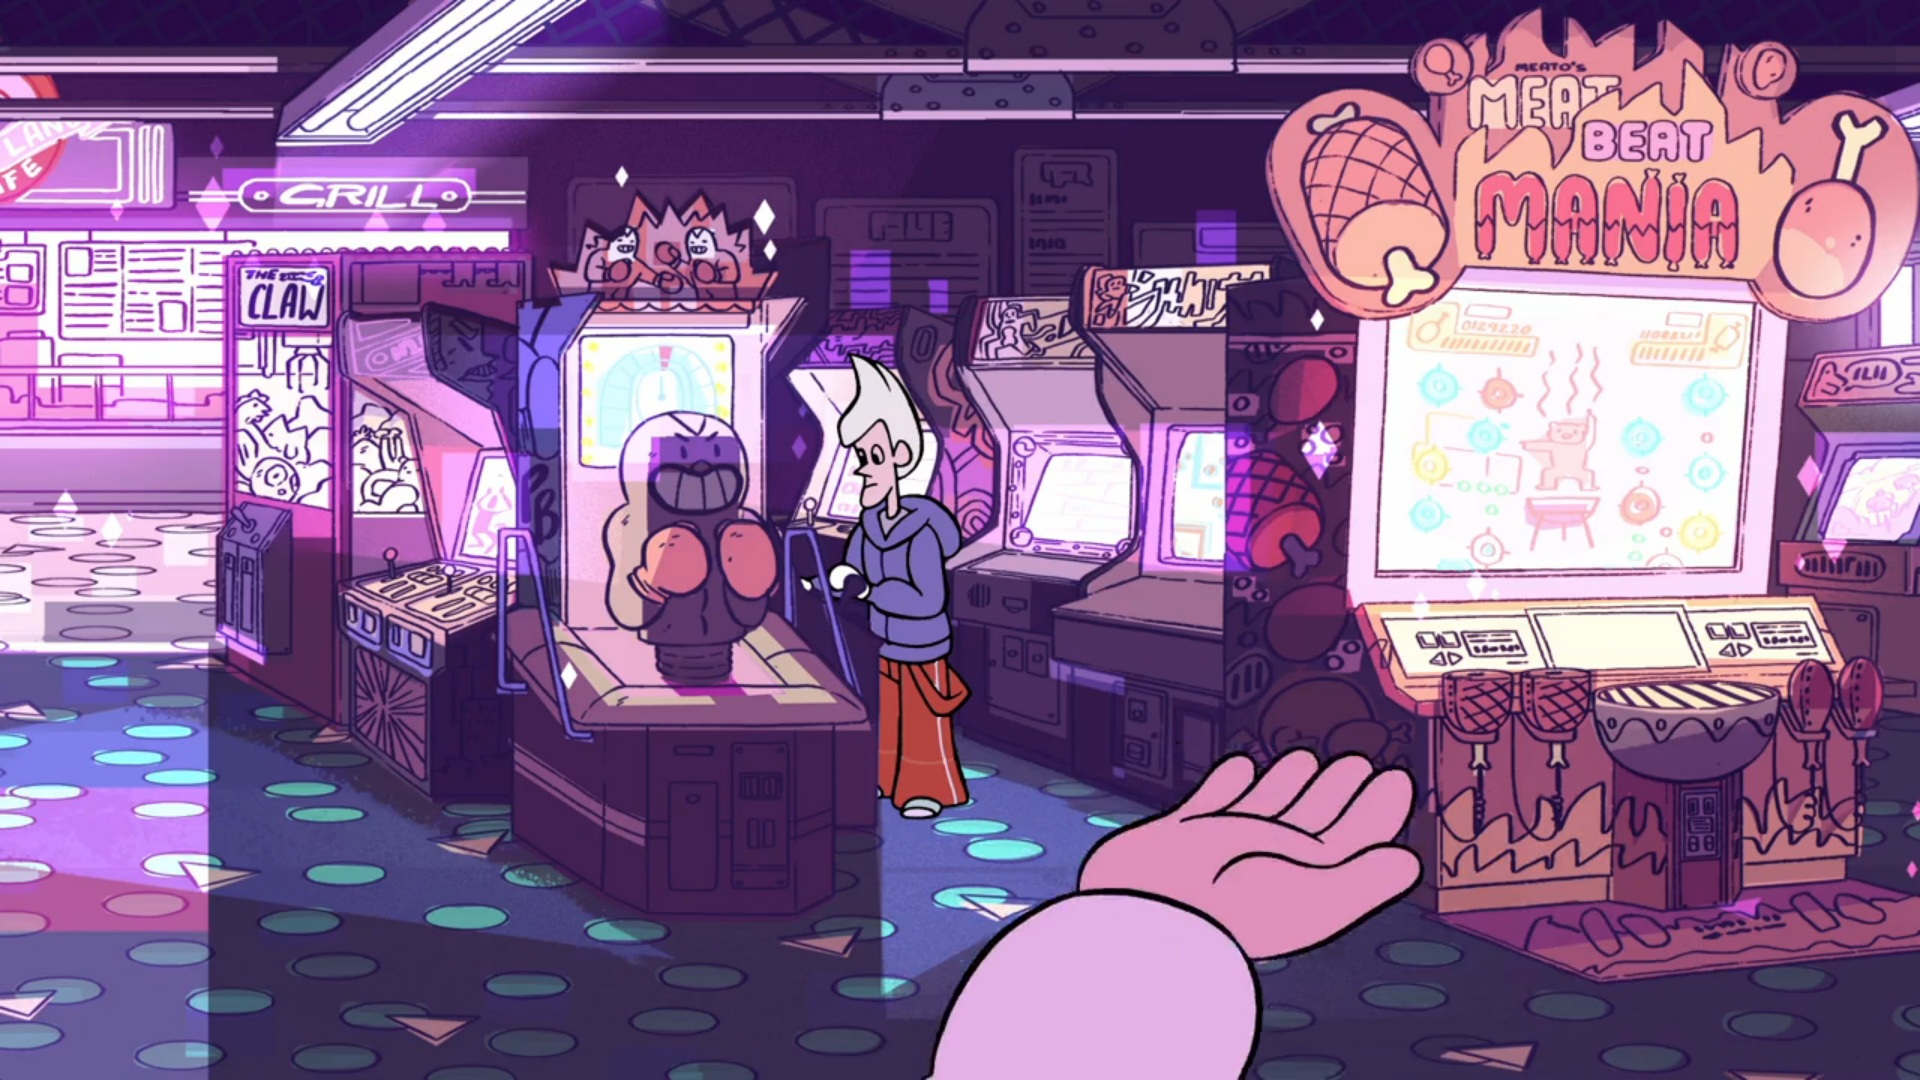 Aesthetic Enforcement: Togetherness in Steven Universe. Lady Geek